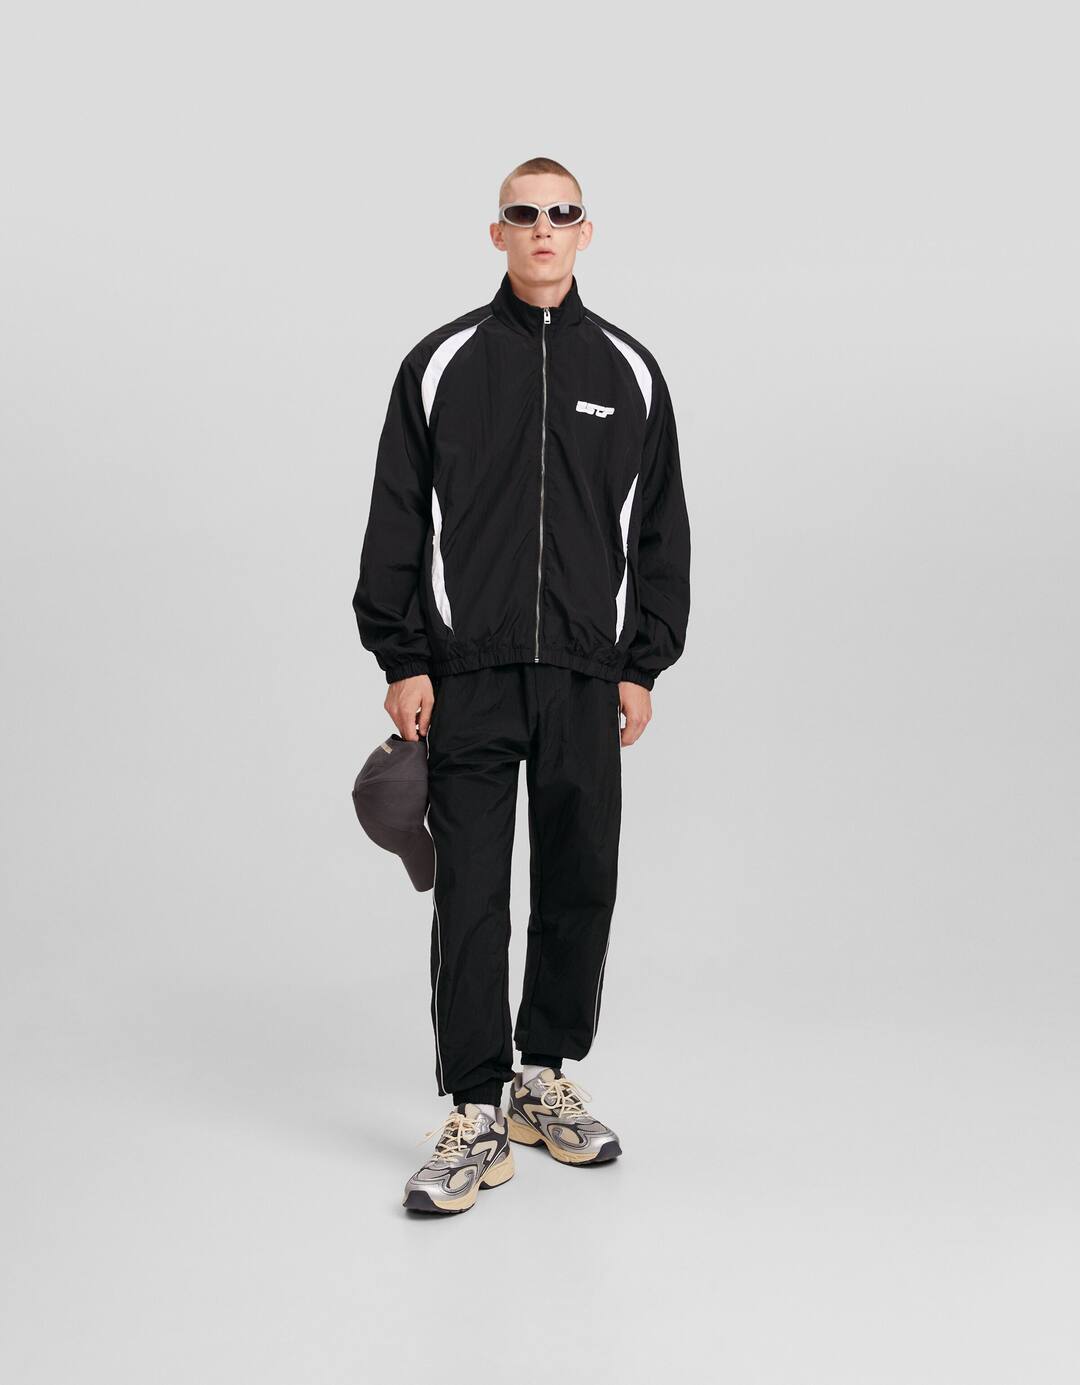 Technical jogging trousers with reflective detail